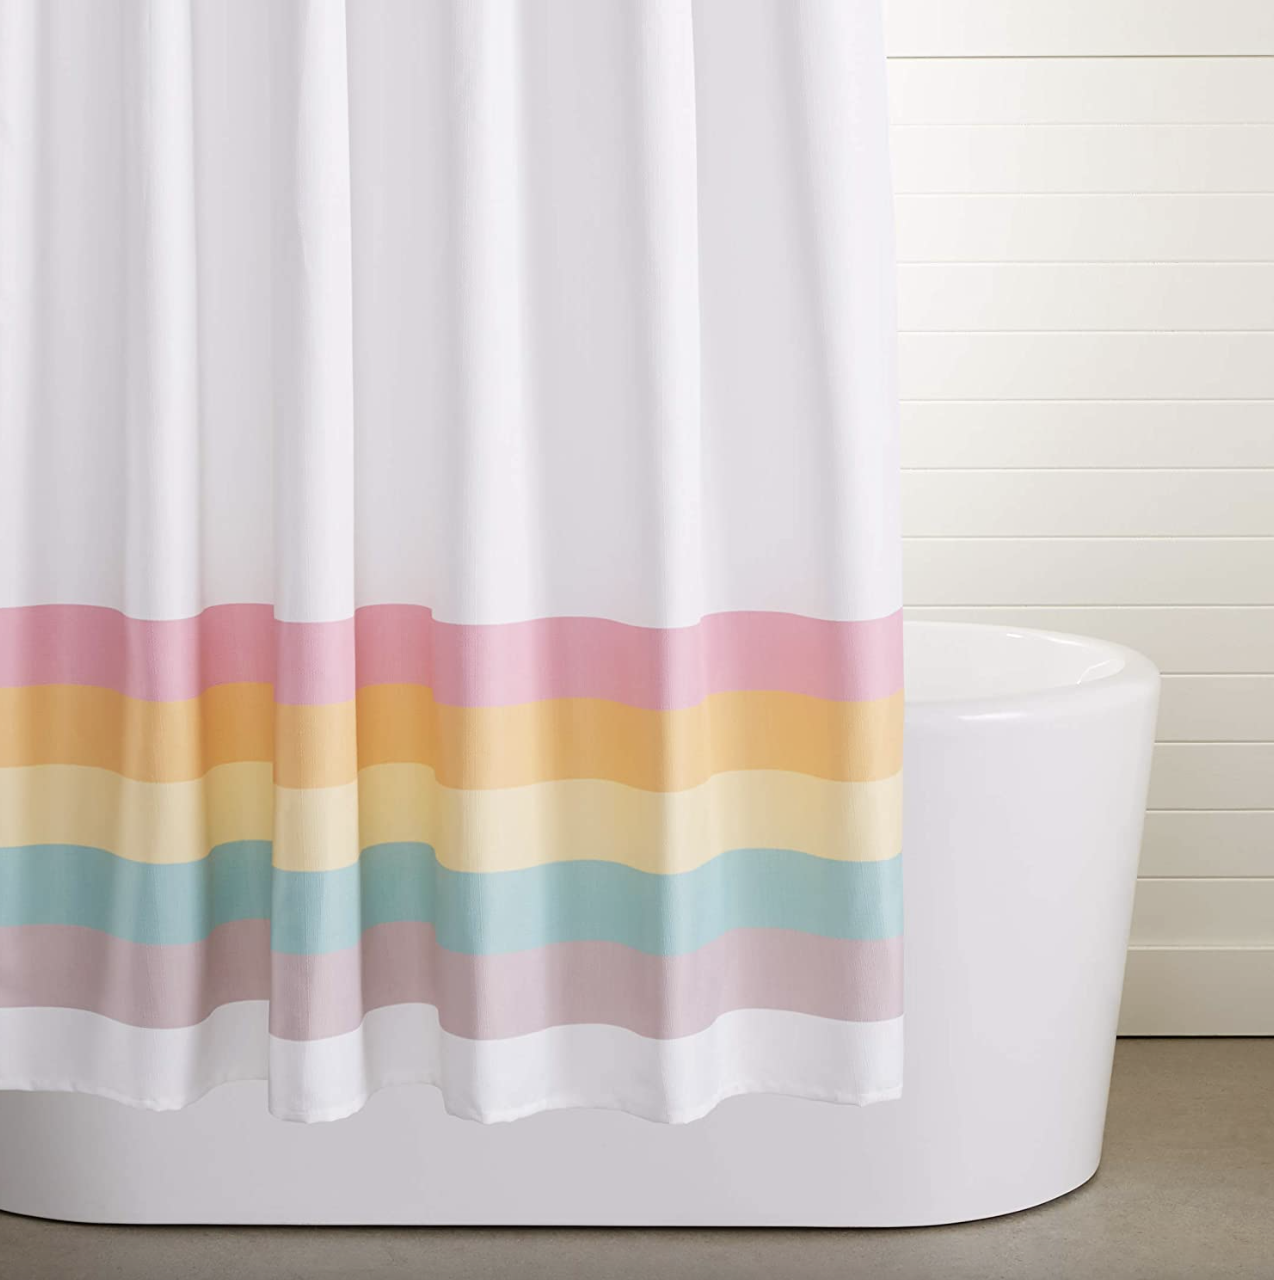 The white shower curtain with multicolored thick stripes on the bottom